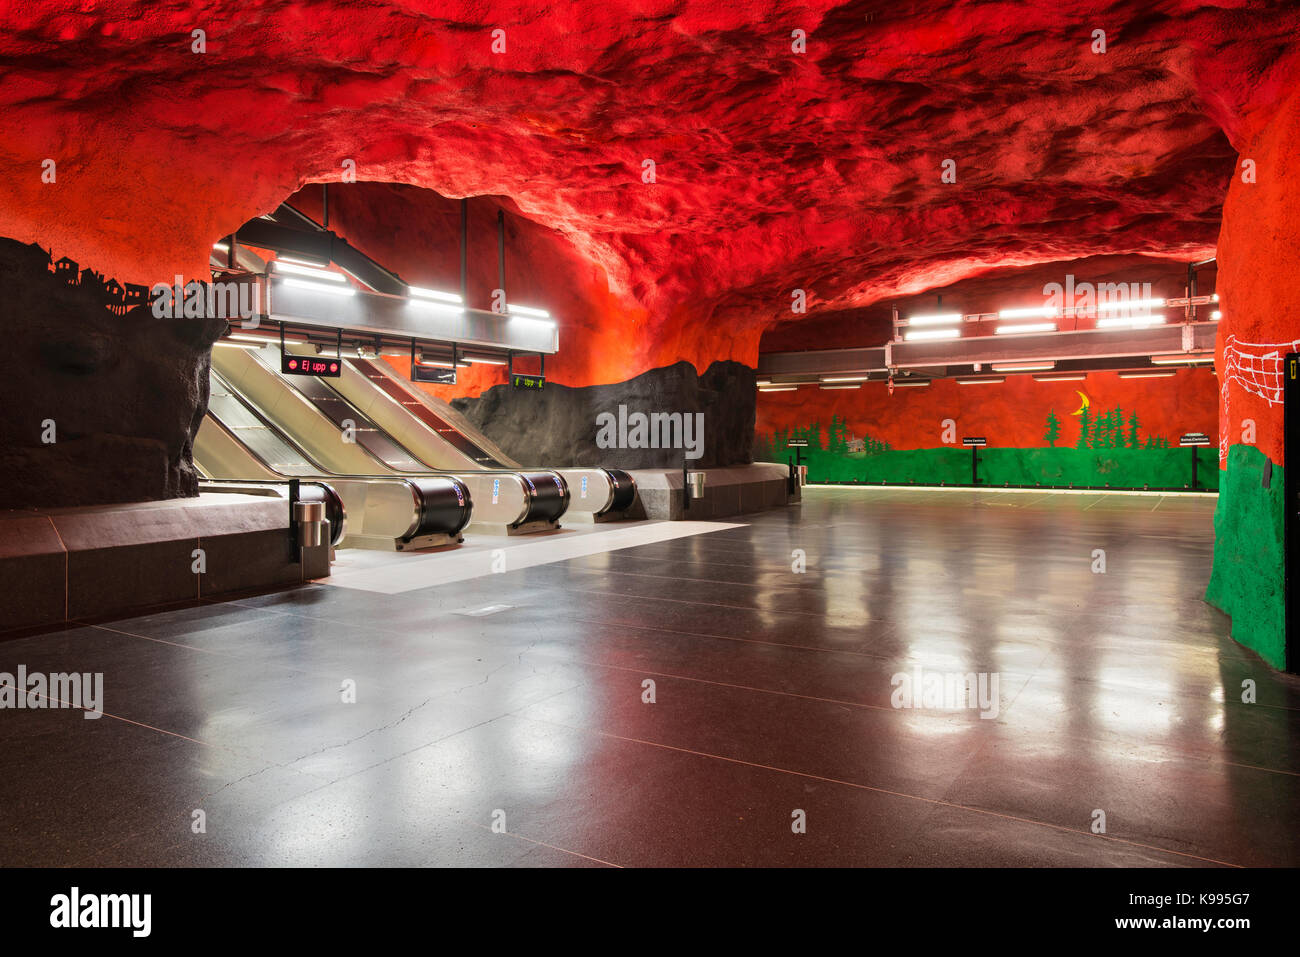 Solna Centrum station on the Stockholm Metro, or T-Bana, in Sweden. The Stockholm Metro is considered to be the longest art museum in the world. Stock Photo